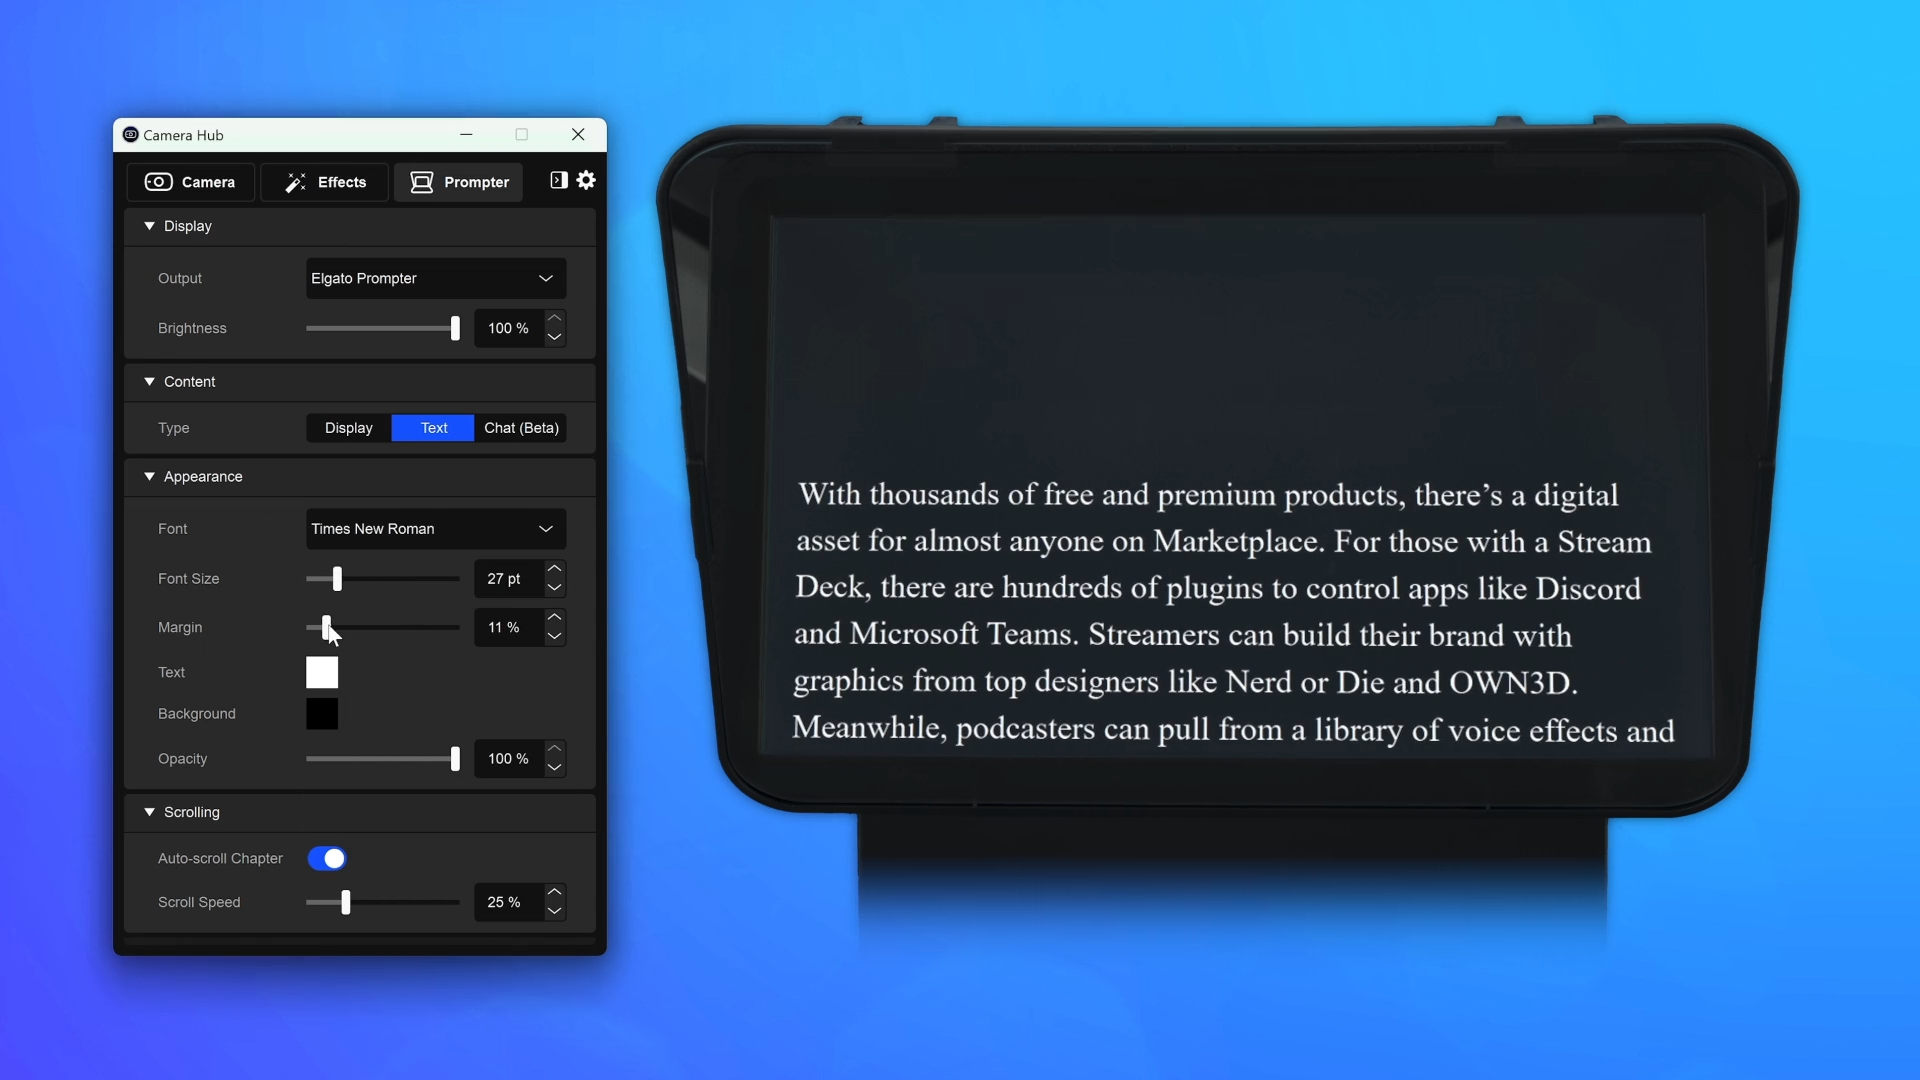 Elgato's Prompter software, showing various sliders and vast customization options for text mode. On the right is a preview of what the prompter output would look like.